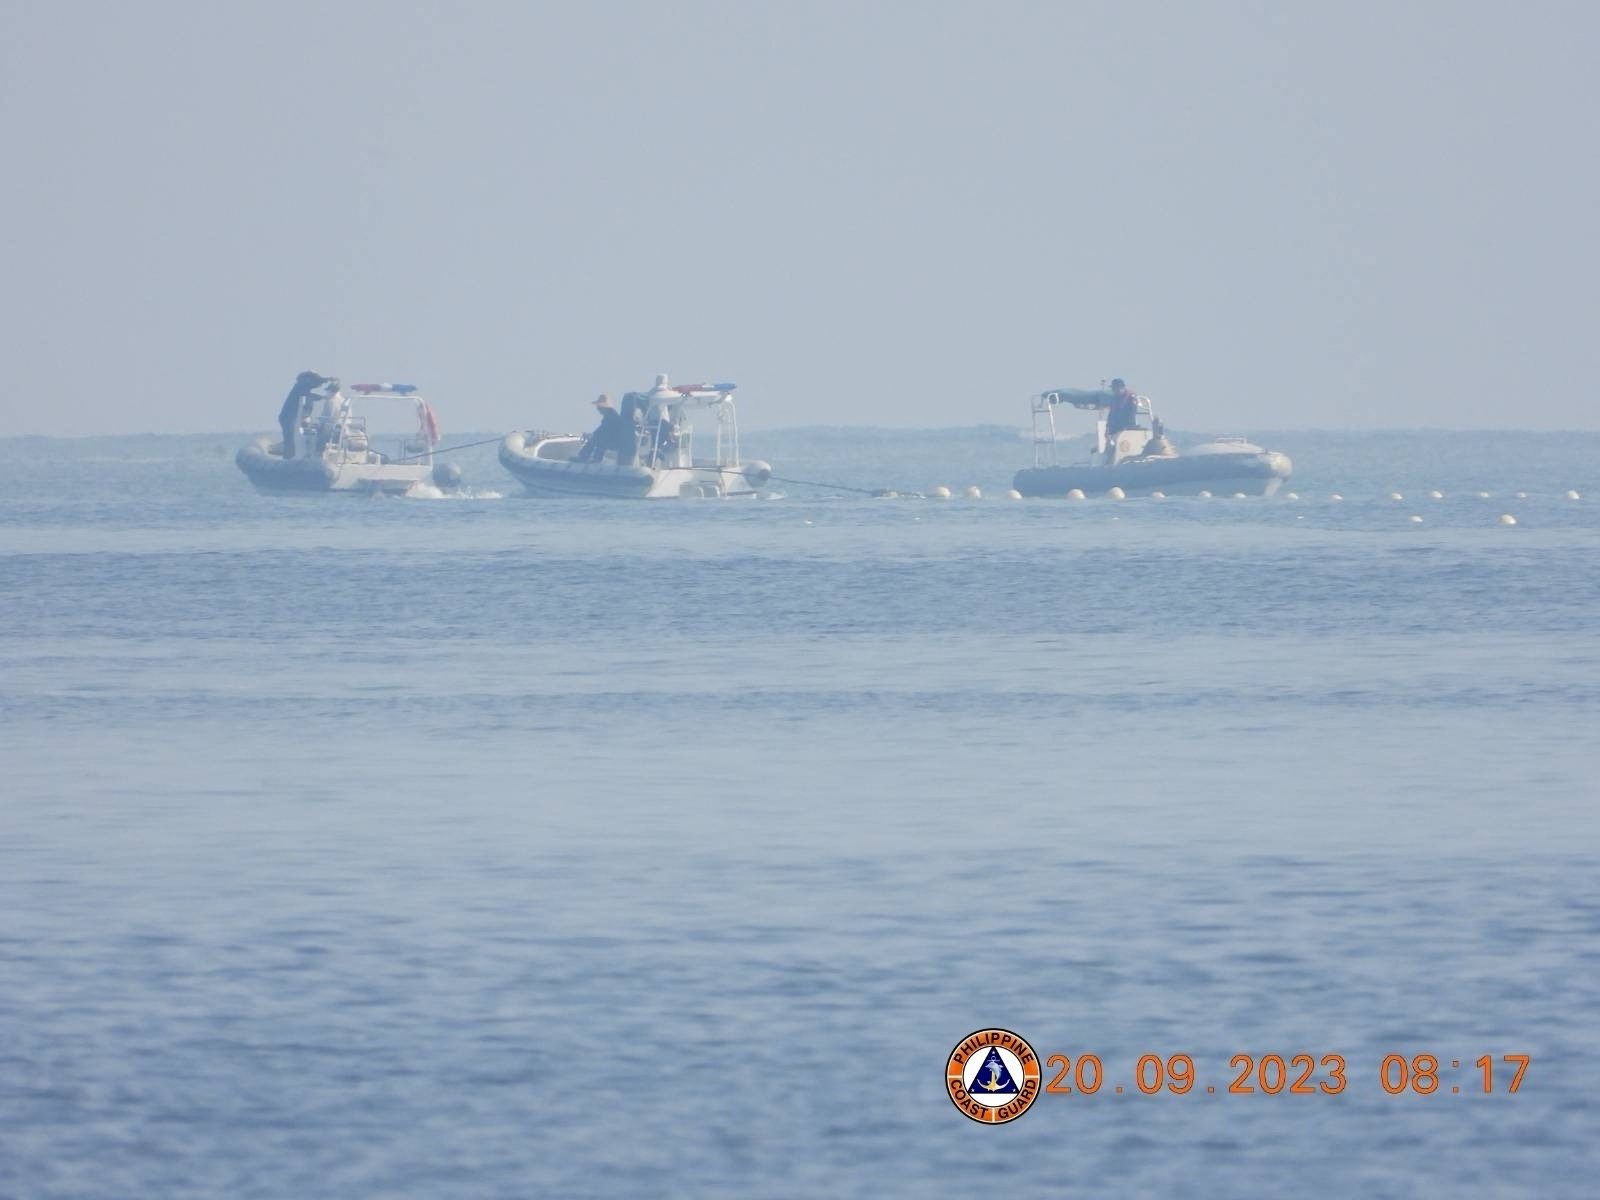 Chinese Coast Guard boats close to the floating barrier are pictured near the Scarborough Shoal.Philippine Coast Guard/Handout via REUTERS